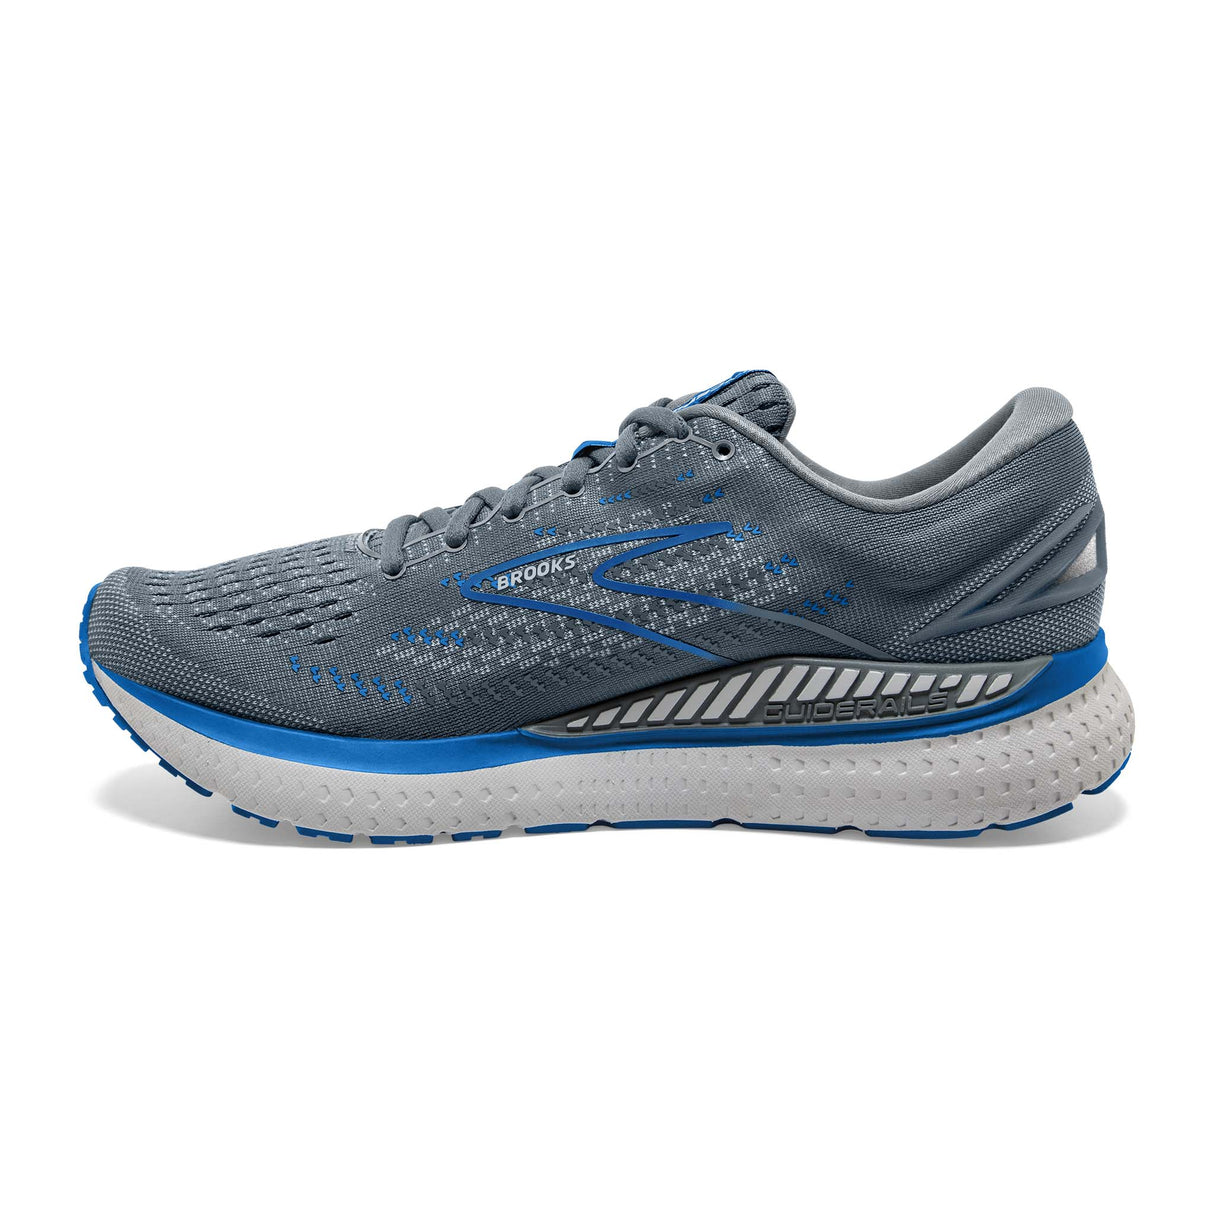 Brooks Glycerin GTS 19 souliers course homme quarry grey dark blue lateral